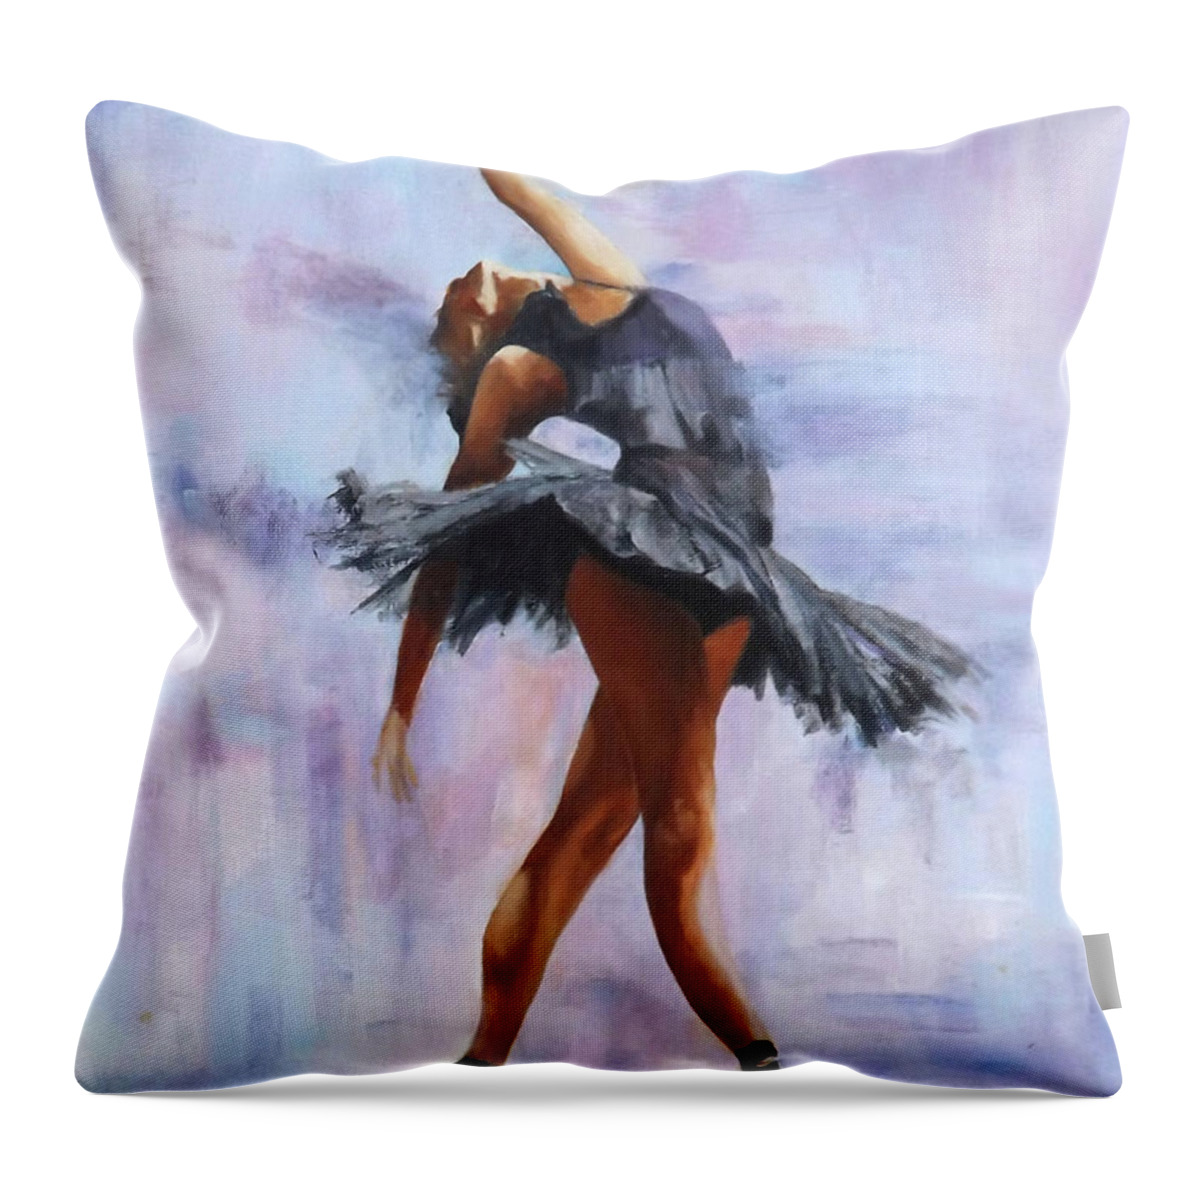 Ballet Throw Pillow featuring the painting Ballerina In Black by Barry BLAKE